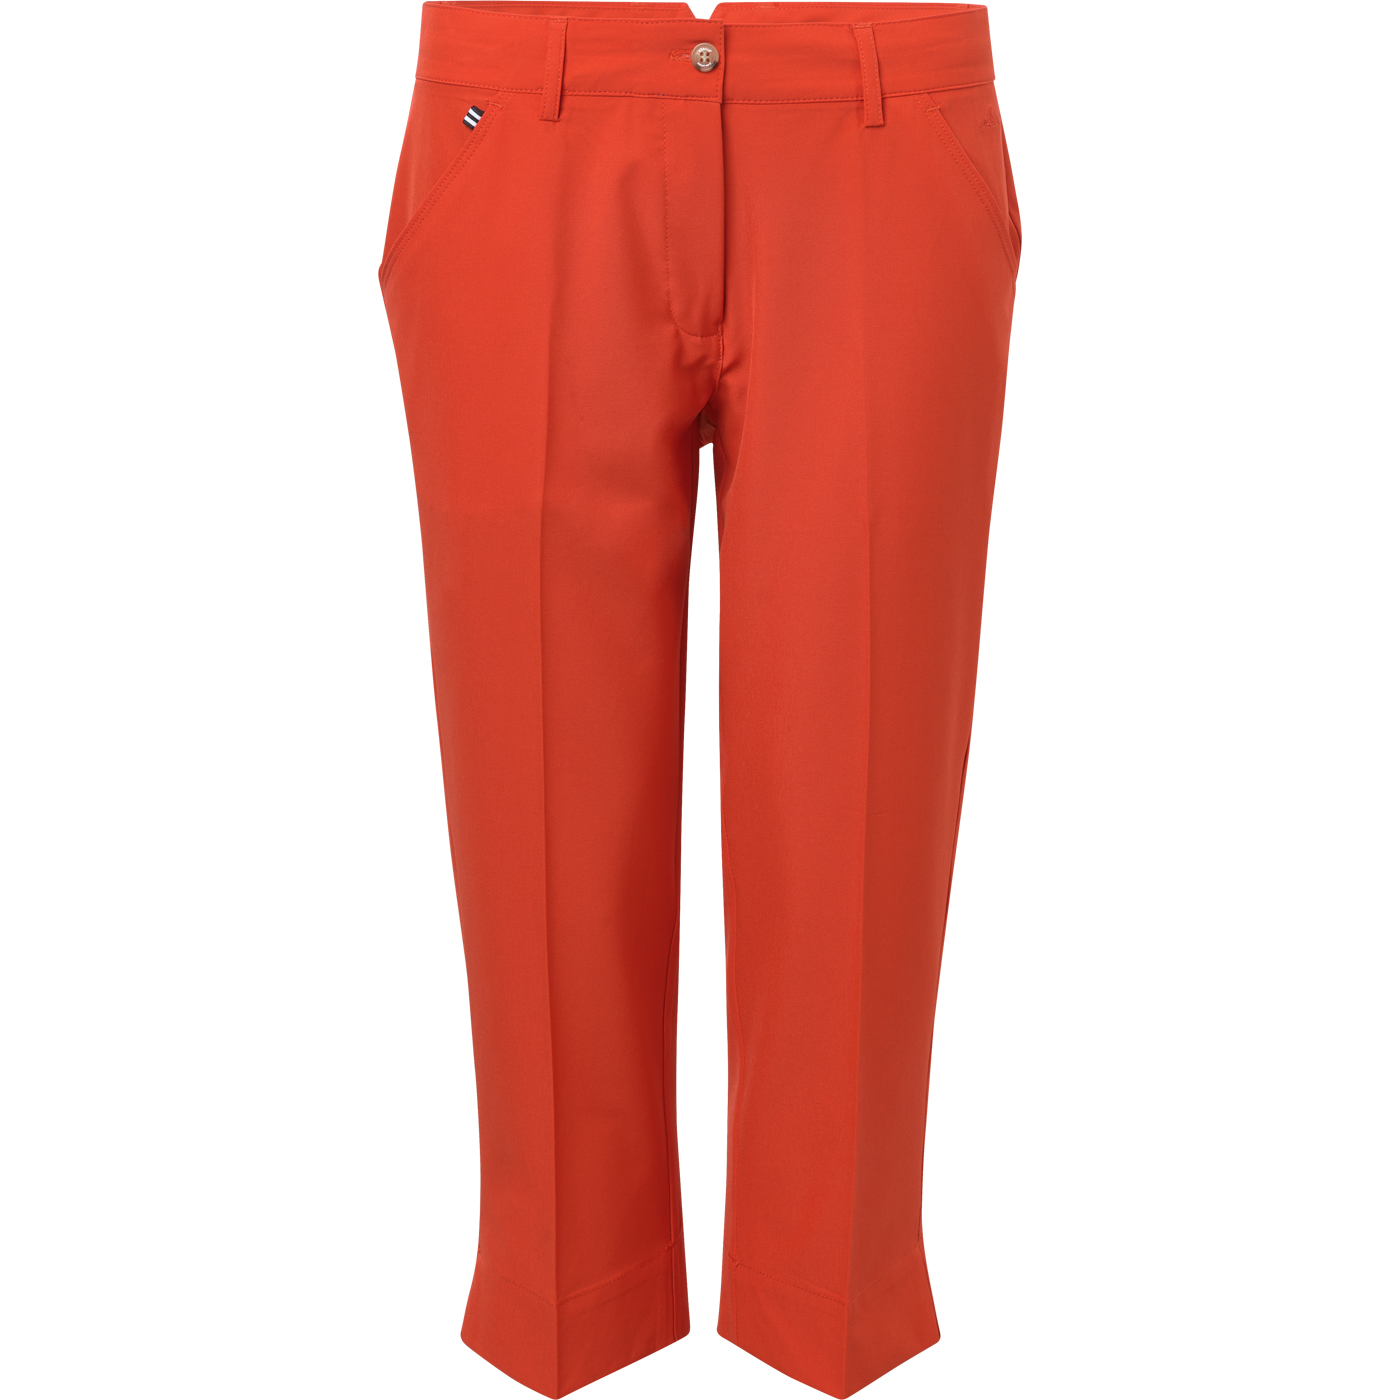 Lds Kildare capri - poppy red in the group WOMEN / All clothing at Abacus Sportswear (2979416)